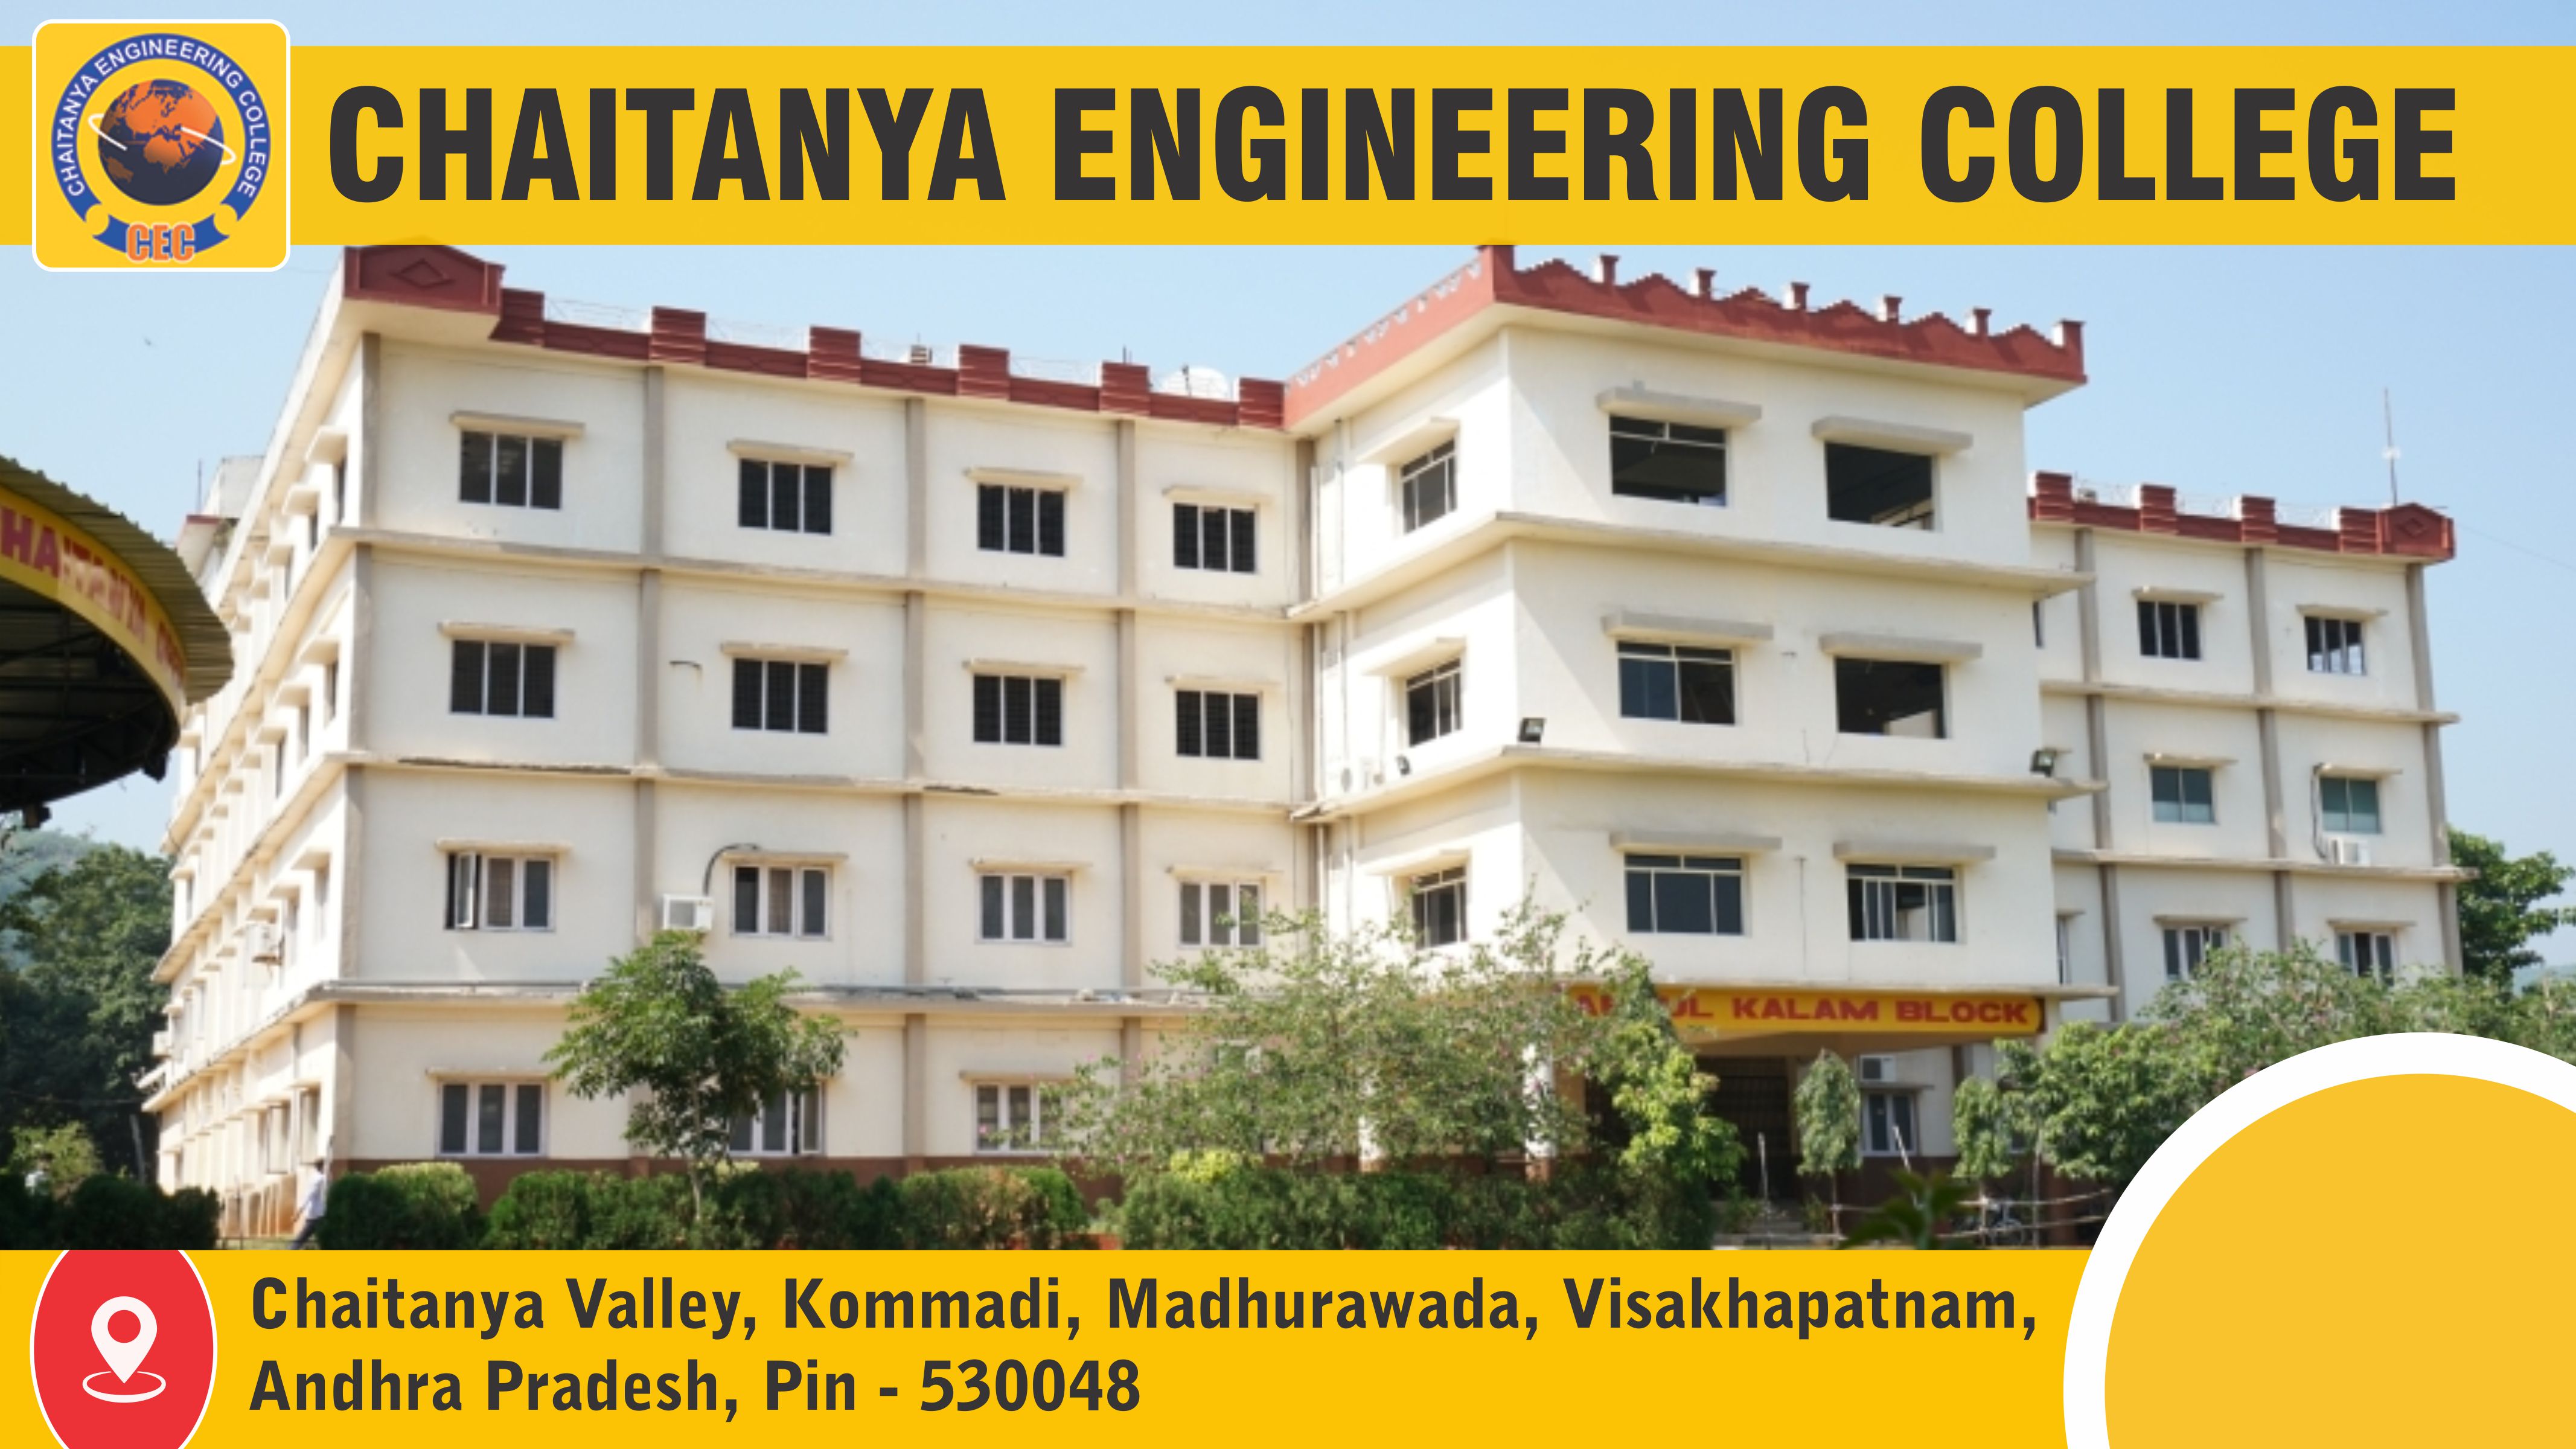 Out Side View of Chaitanya Engineering College, Visakhapatnam 